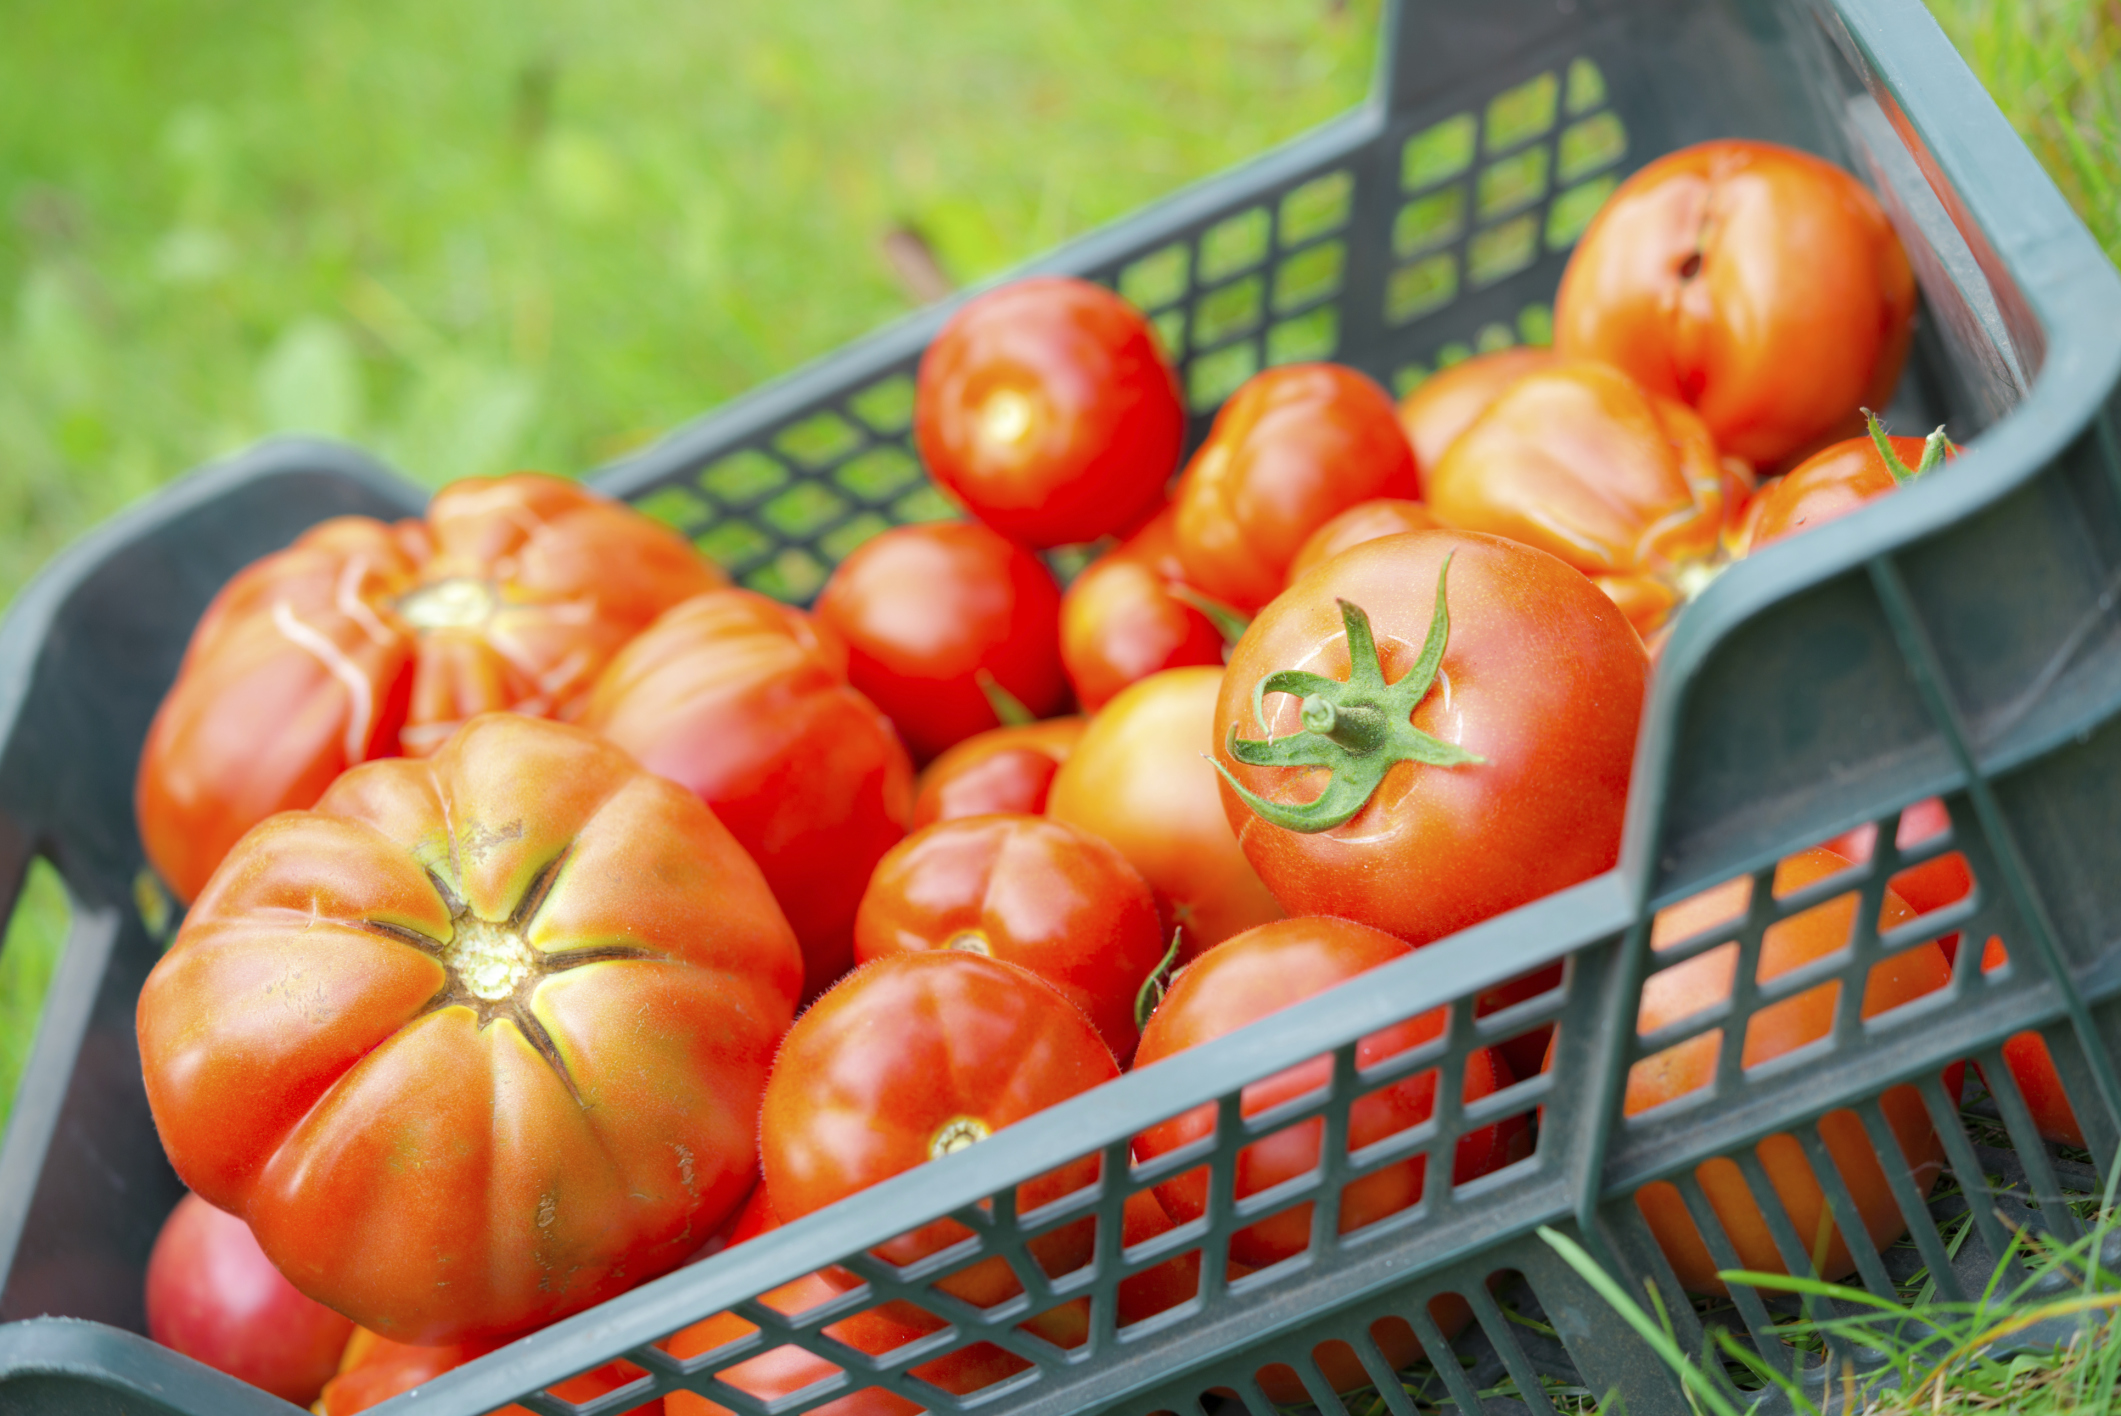 The Best Tomato Varieties for Canning